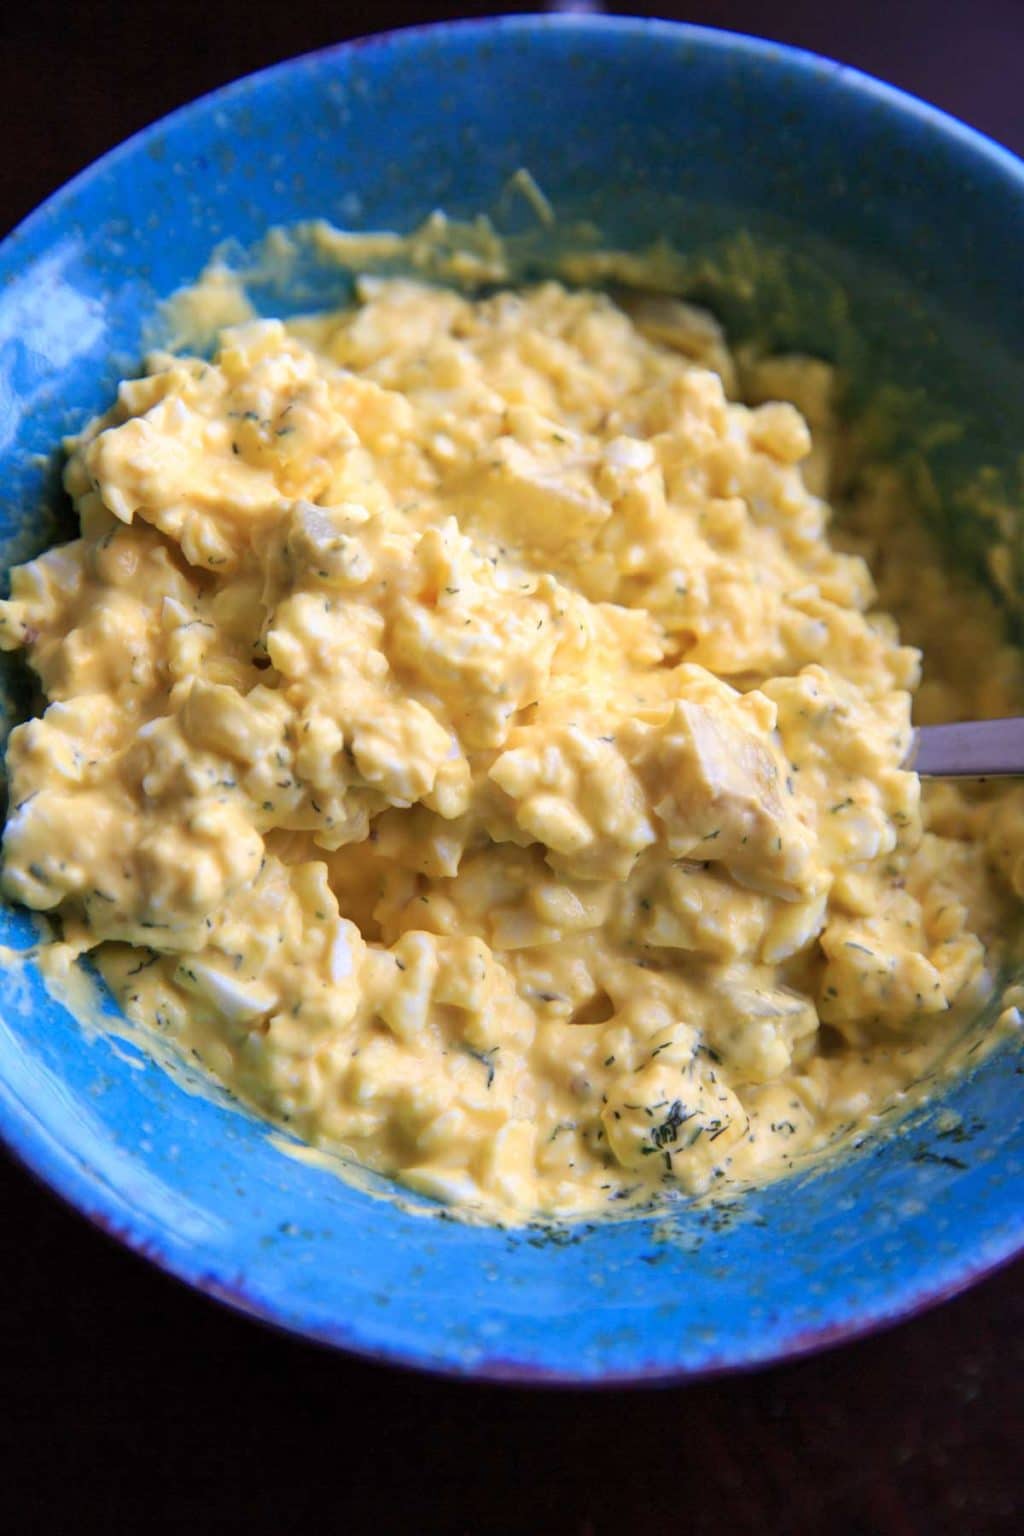 Dill Pickle Egg Salad - serve as a side or eat as a meal! Light on the mayo and big on the crunch! 